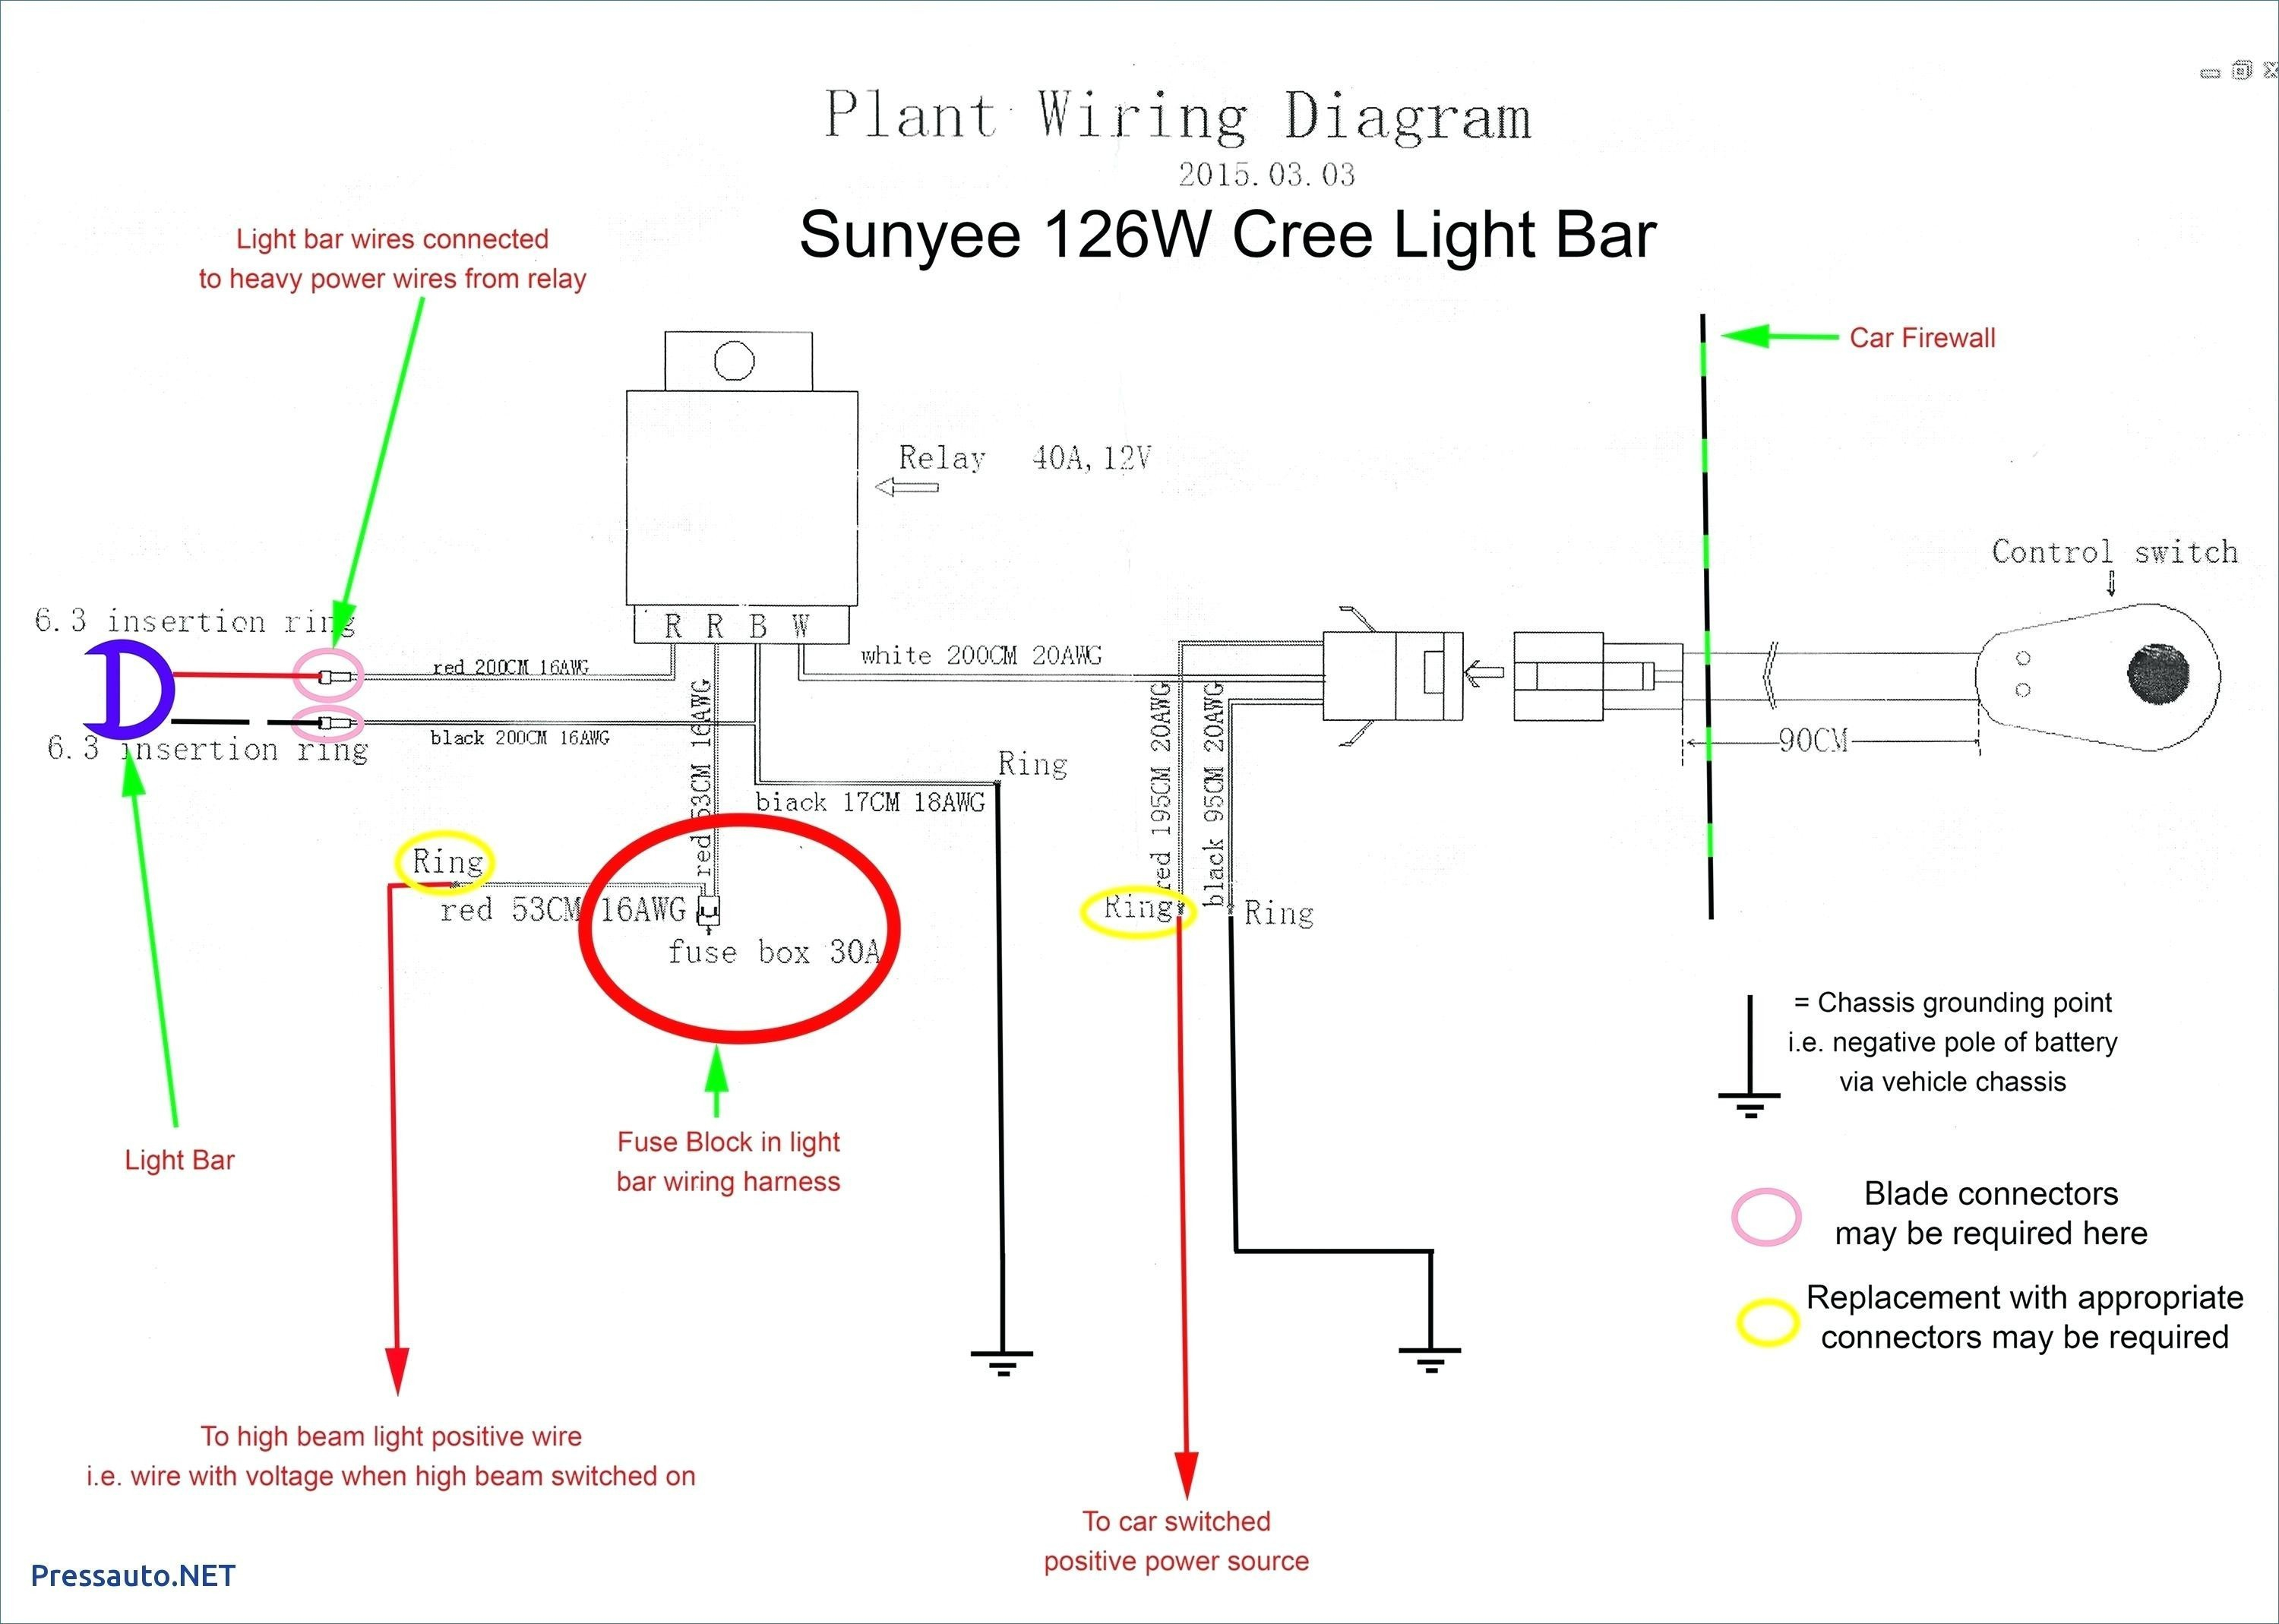 Wiring Diagram For Fluorescent Lights With Carport - Wiring Diagrams - Fluorescent Light Wiring Diagram